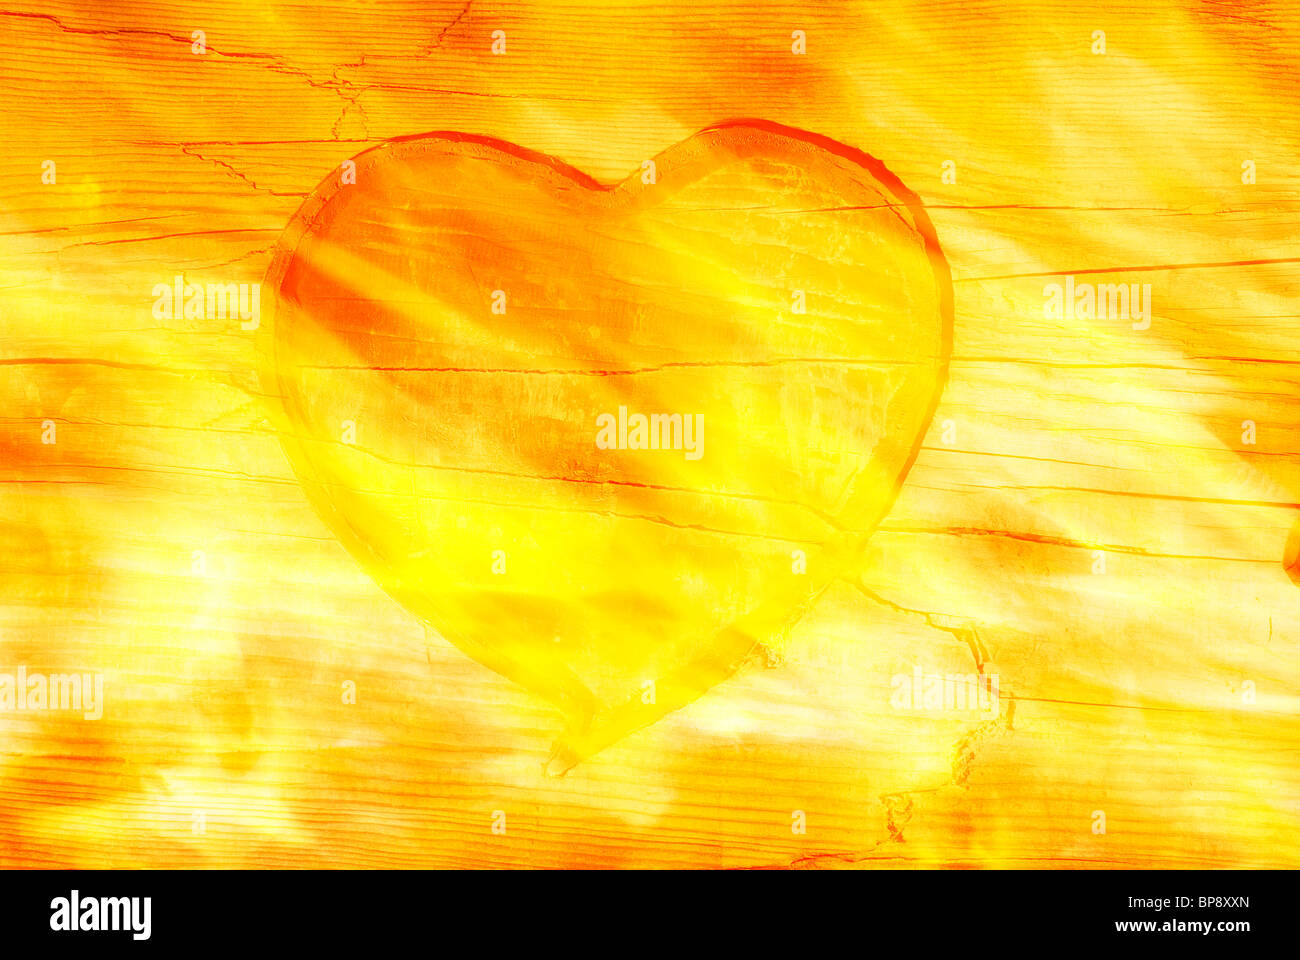 Burning heart. Red heart pattern engraved on old wood with fire. textured effect. Stock Photo